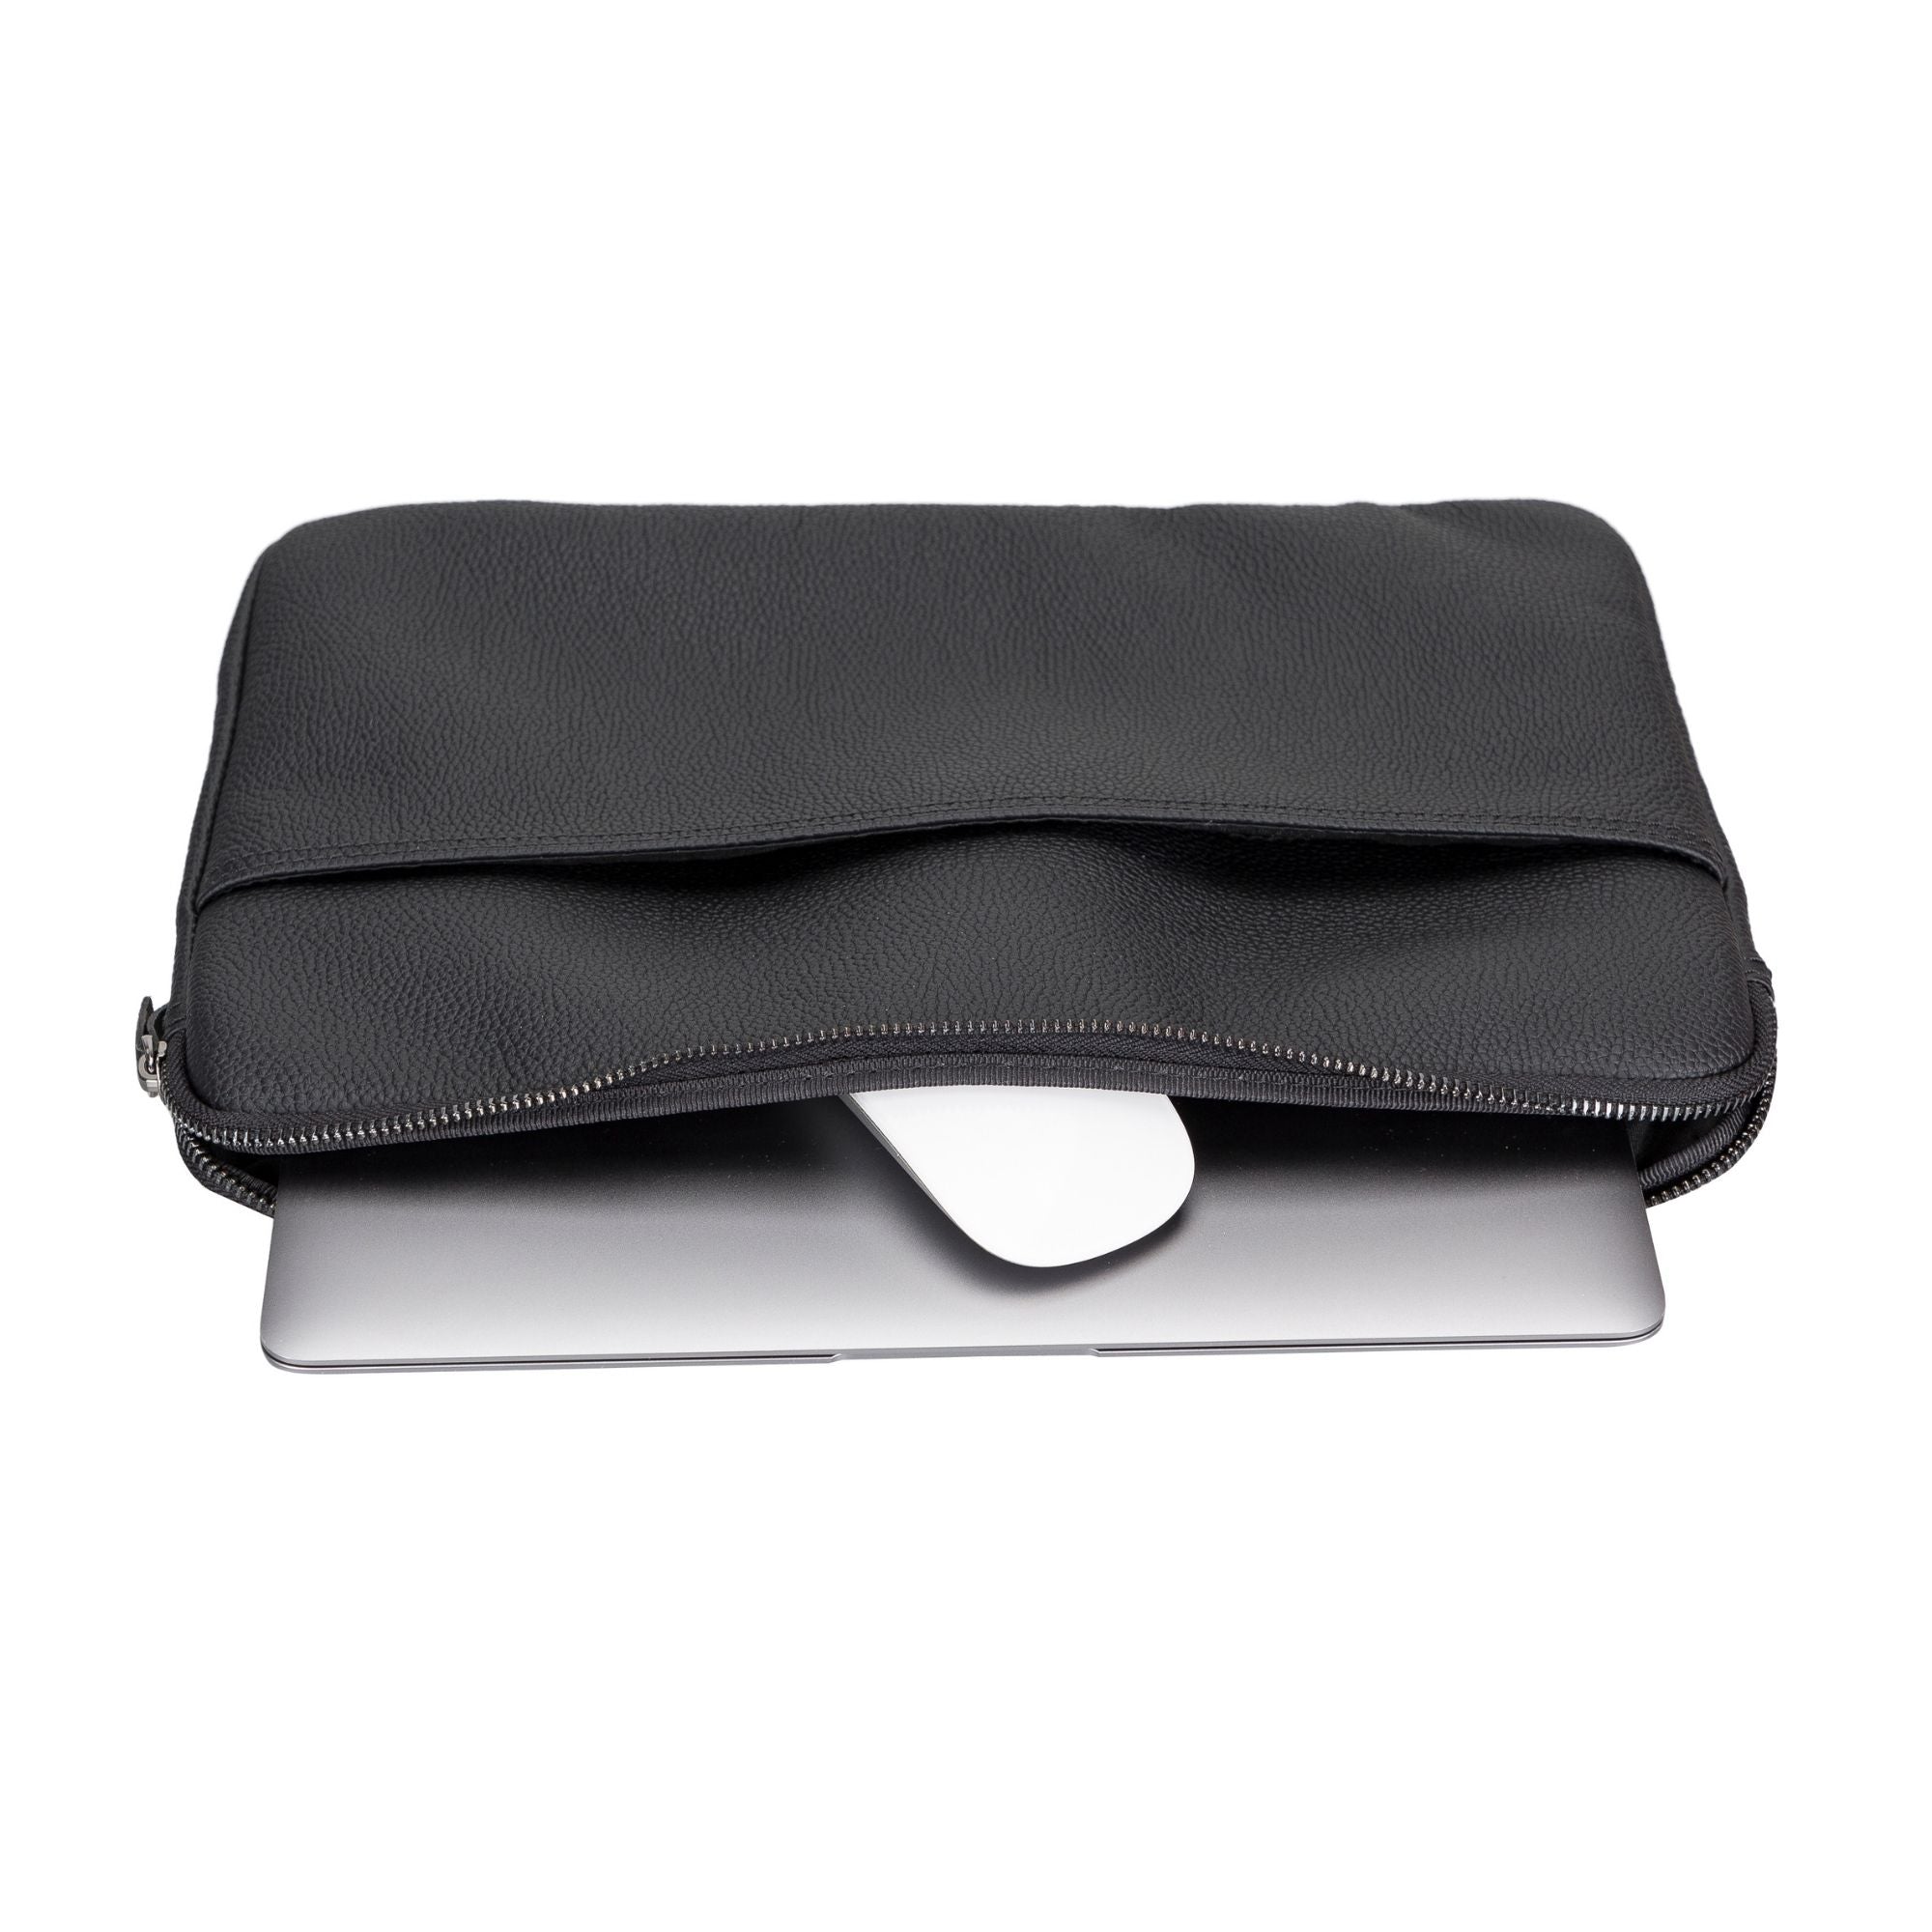 Kemmerer Leather Sleeve for iPad and MacBook - 11 Inches - Black - TORONATA